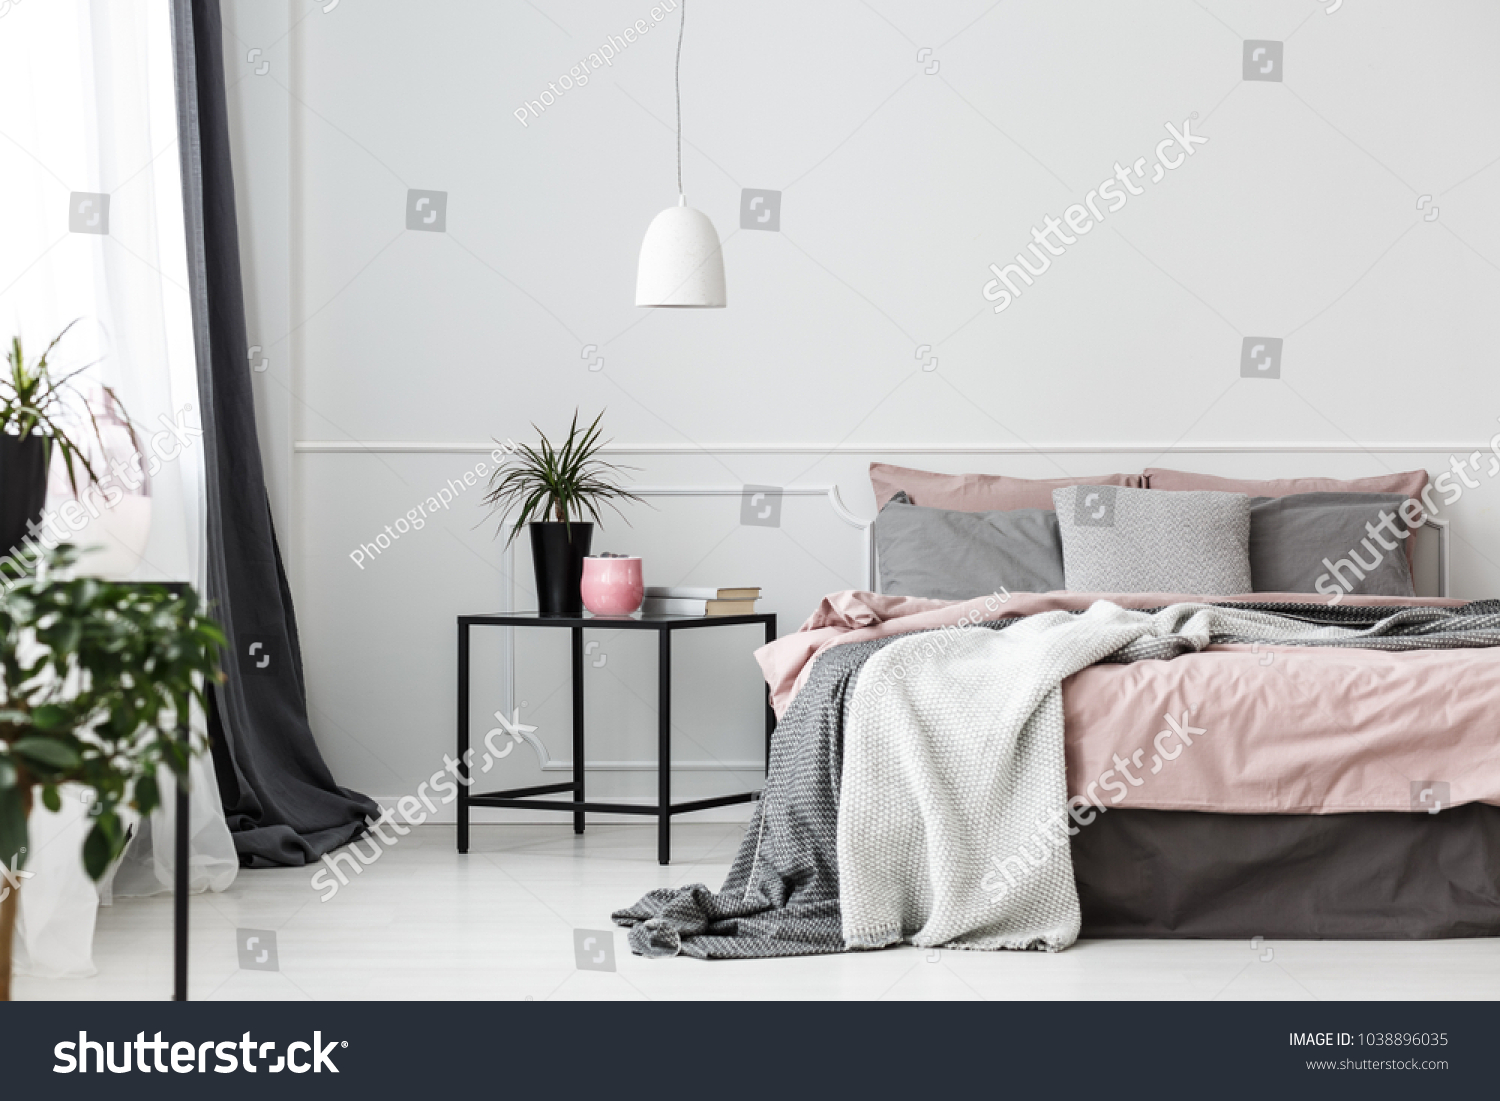 Grey bedsheets on bed in pink bedroom interior with plant on the table against white wall #1038896035